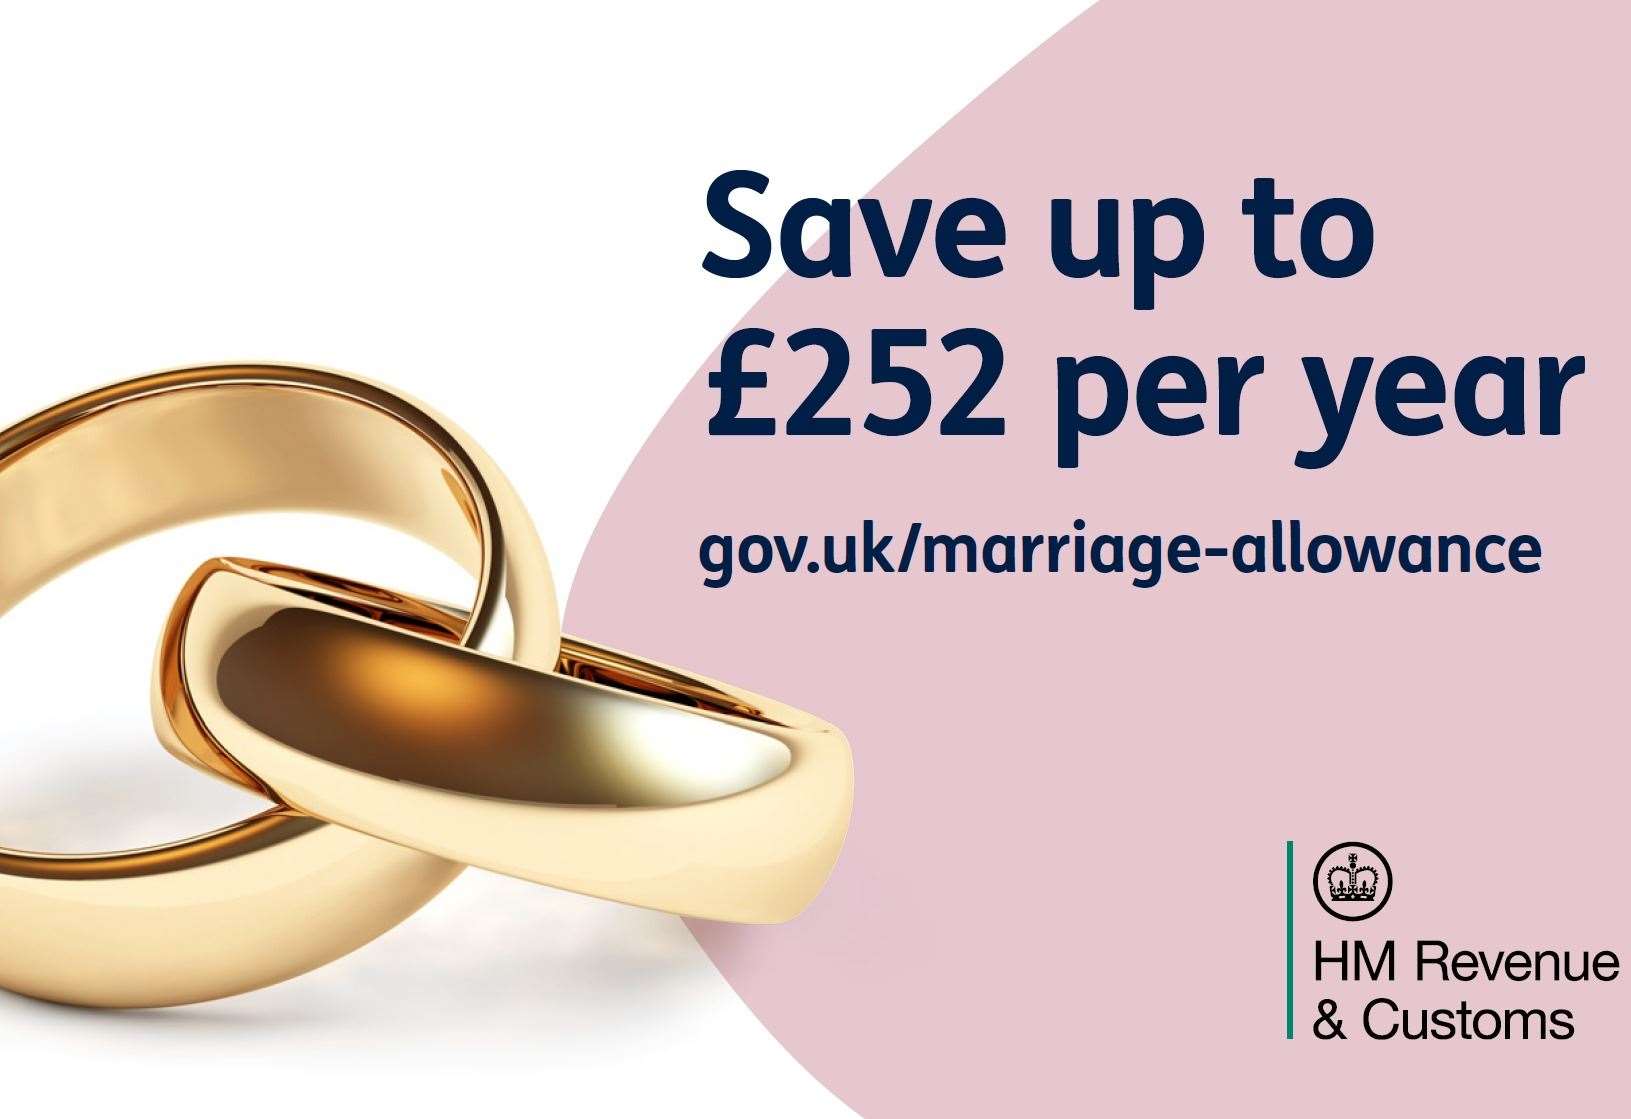 hmrc-are-reminding-married-couples-and-civil-partnerships-to-sign-up